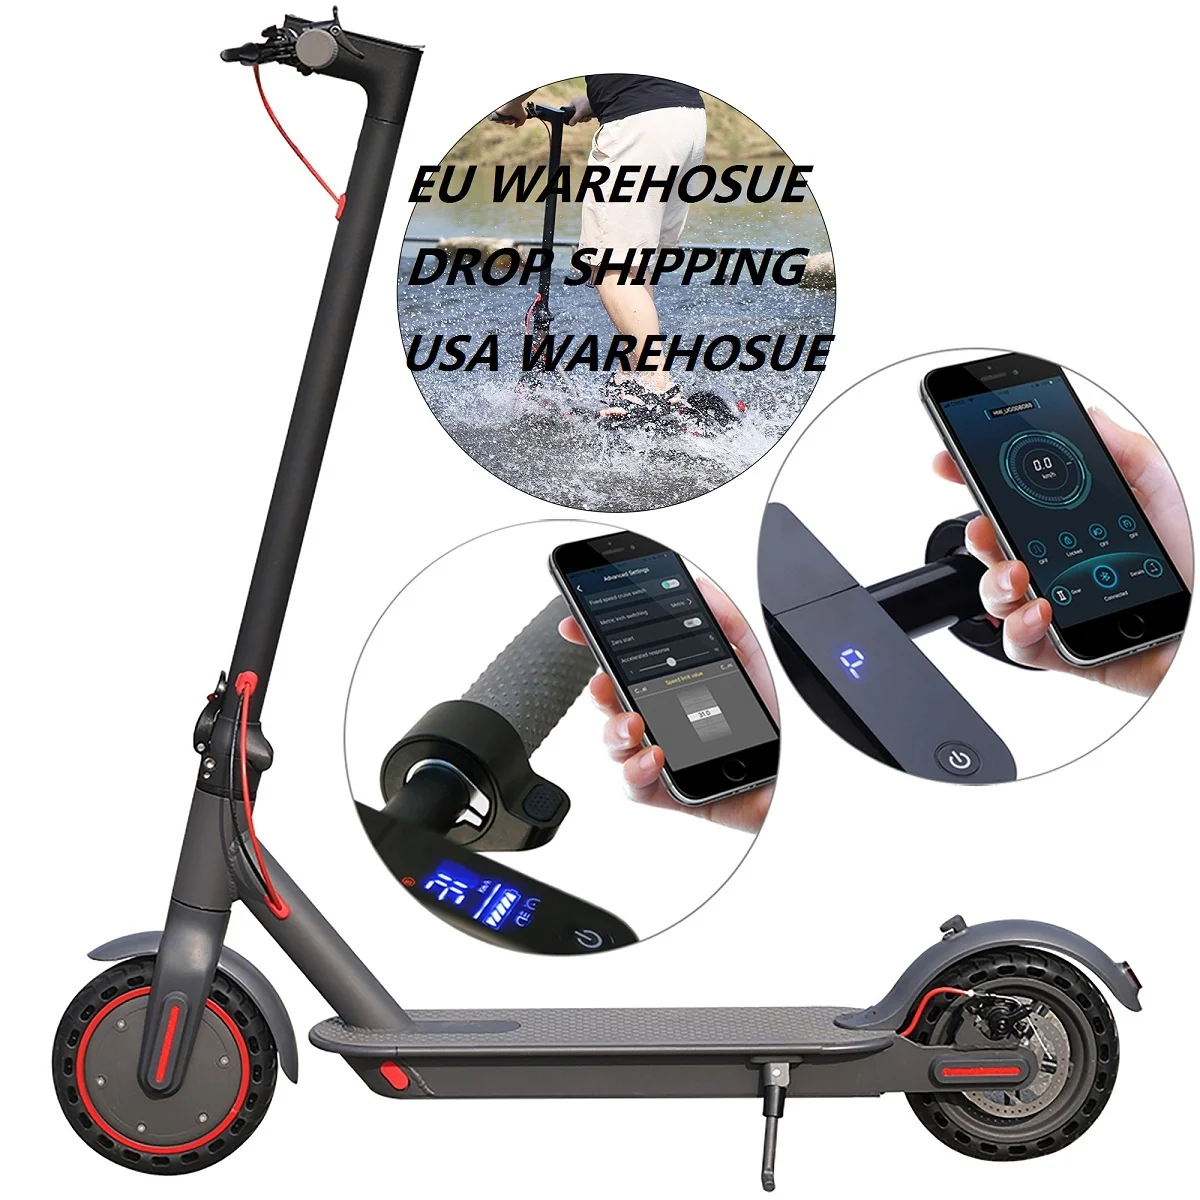 

AOVOPRO UK EU US Warehouse Drop Shipping 350W 10.5Ah Battery 35KM Range M365Pro Foldable Adult Electric Scooter With Smart APP, Black grey